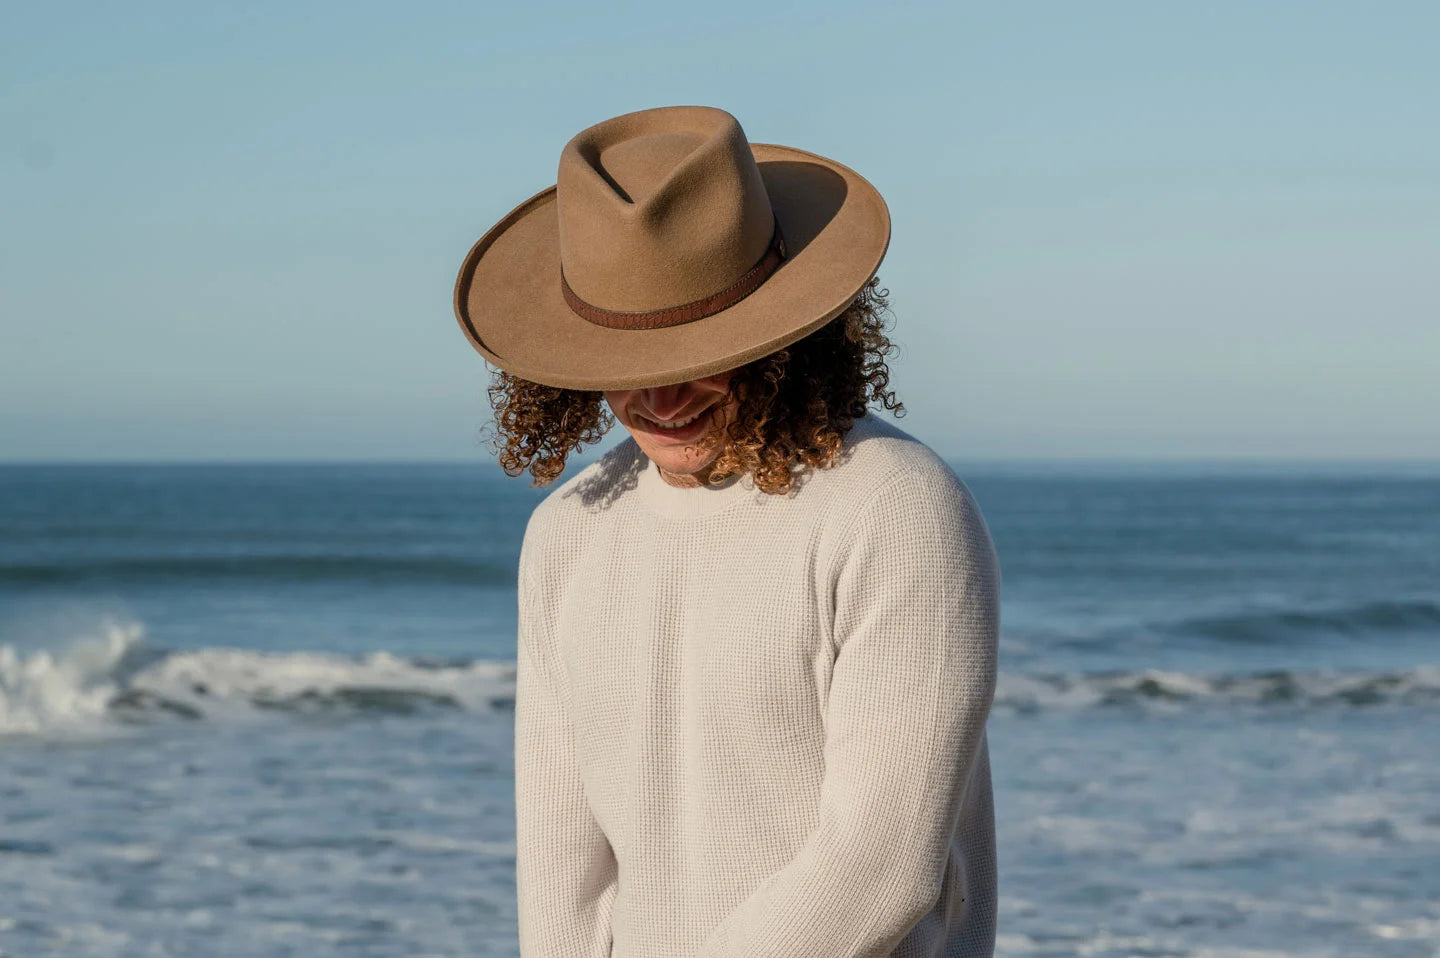 Man at beach while wearing the hudson bark felt fedora hat by American Hat Makers